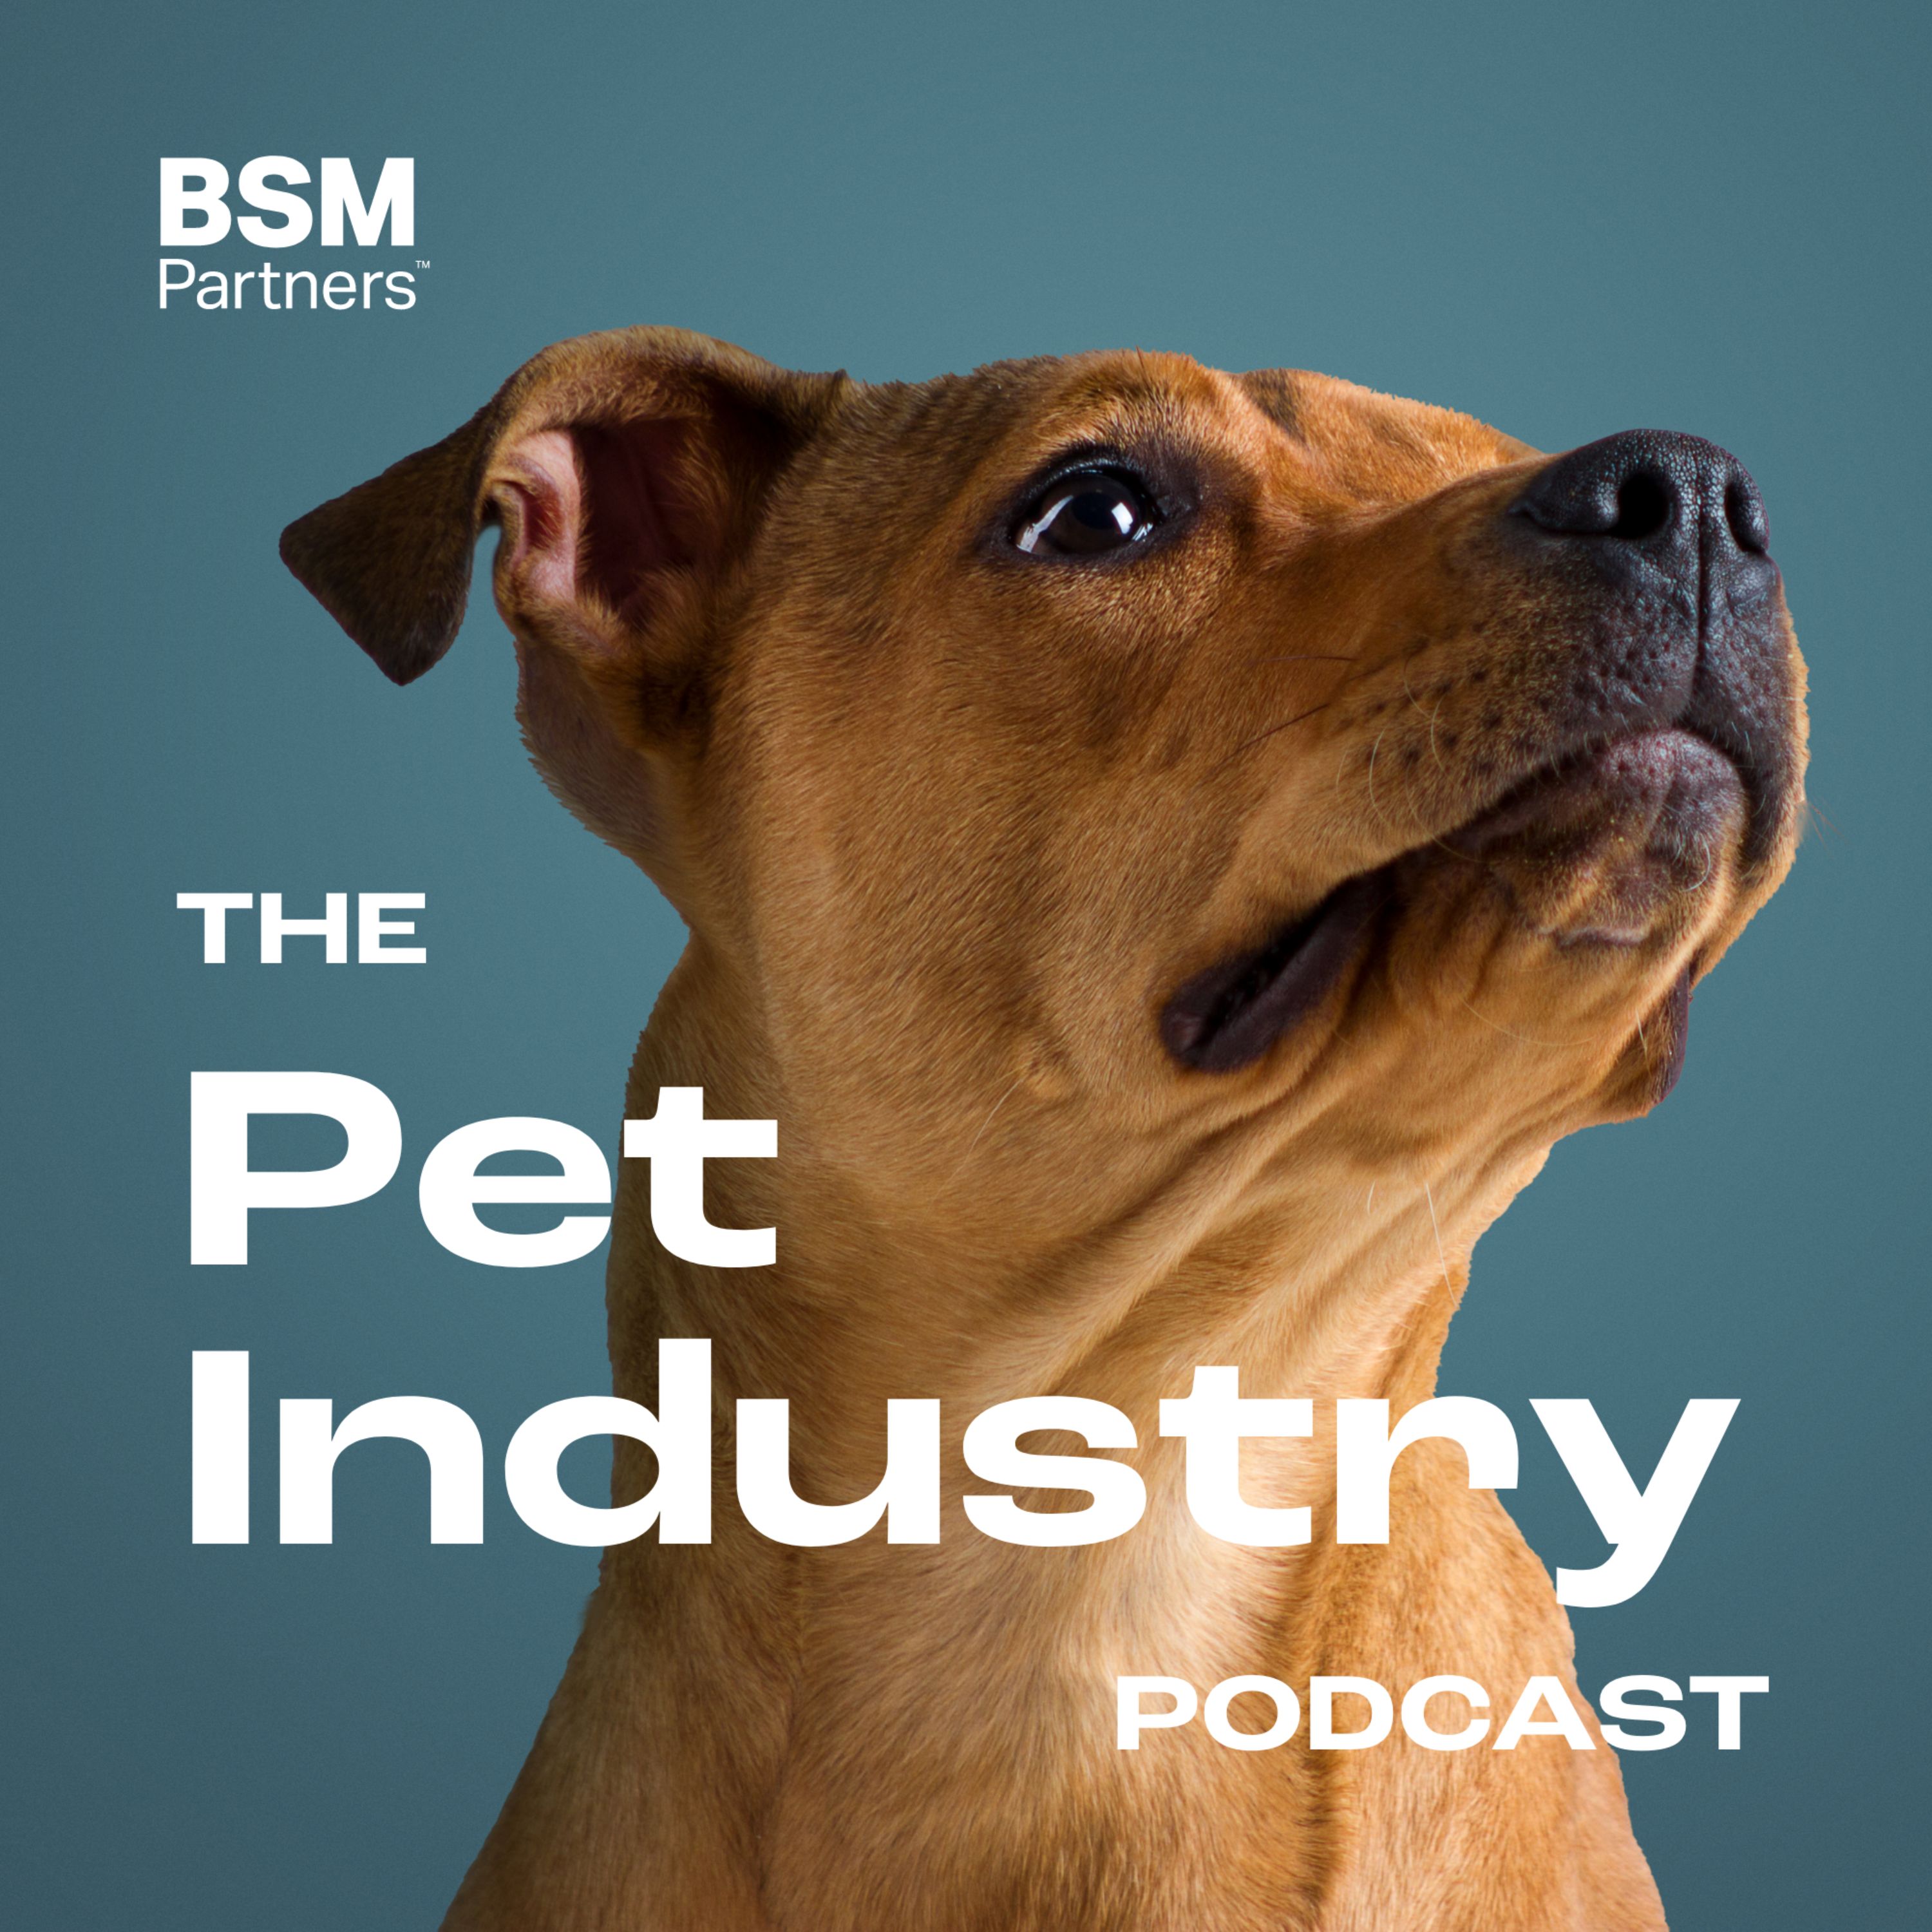 Pets, Passion and Podcasting - BSM Partners' Origin Story